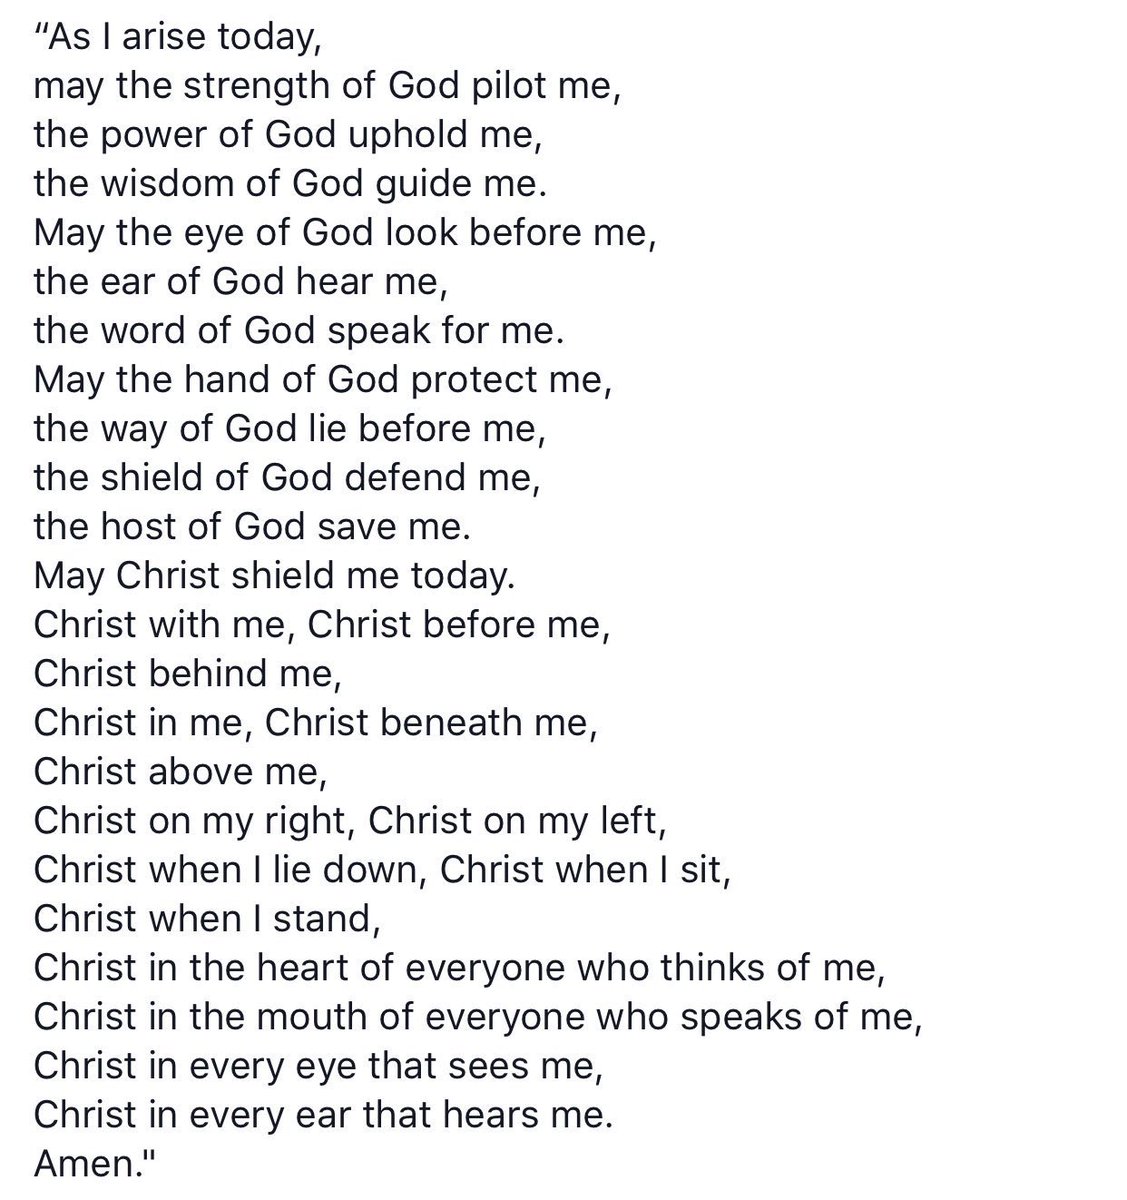 I’ll be sharing this from St. Patrick’s Breastplate prayer at our services today. #StPatrickDay